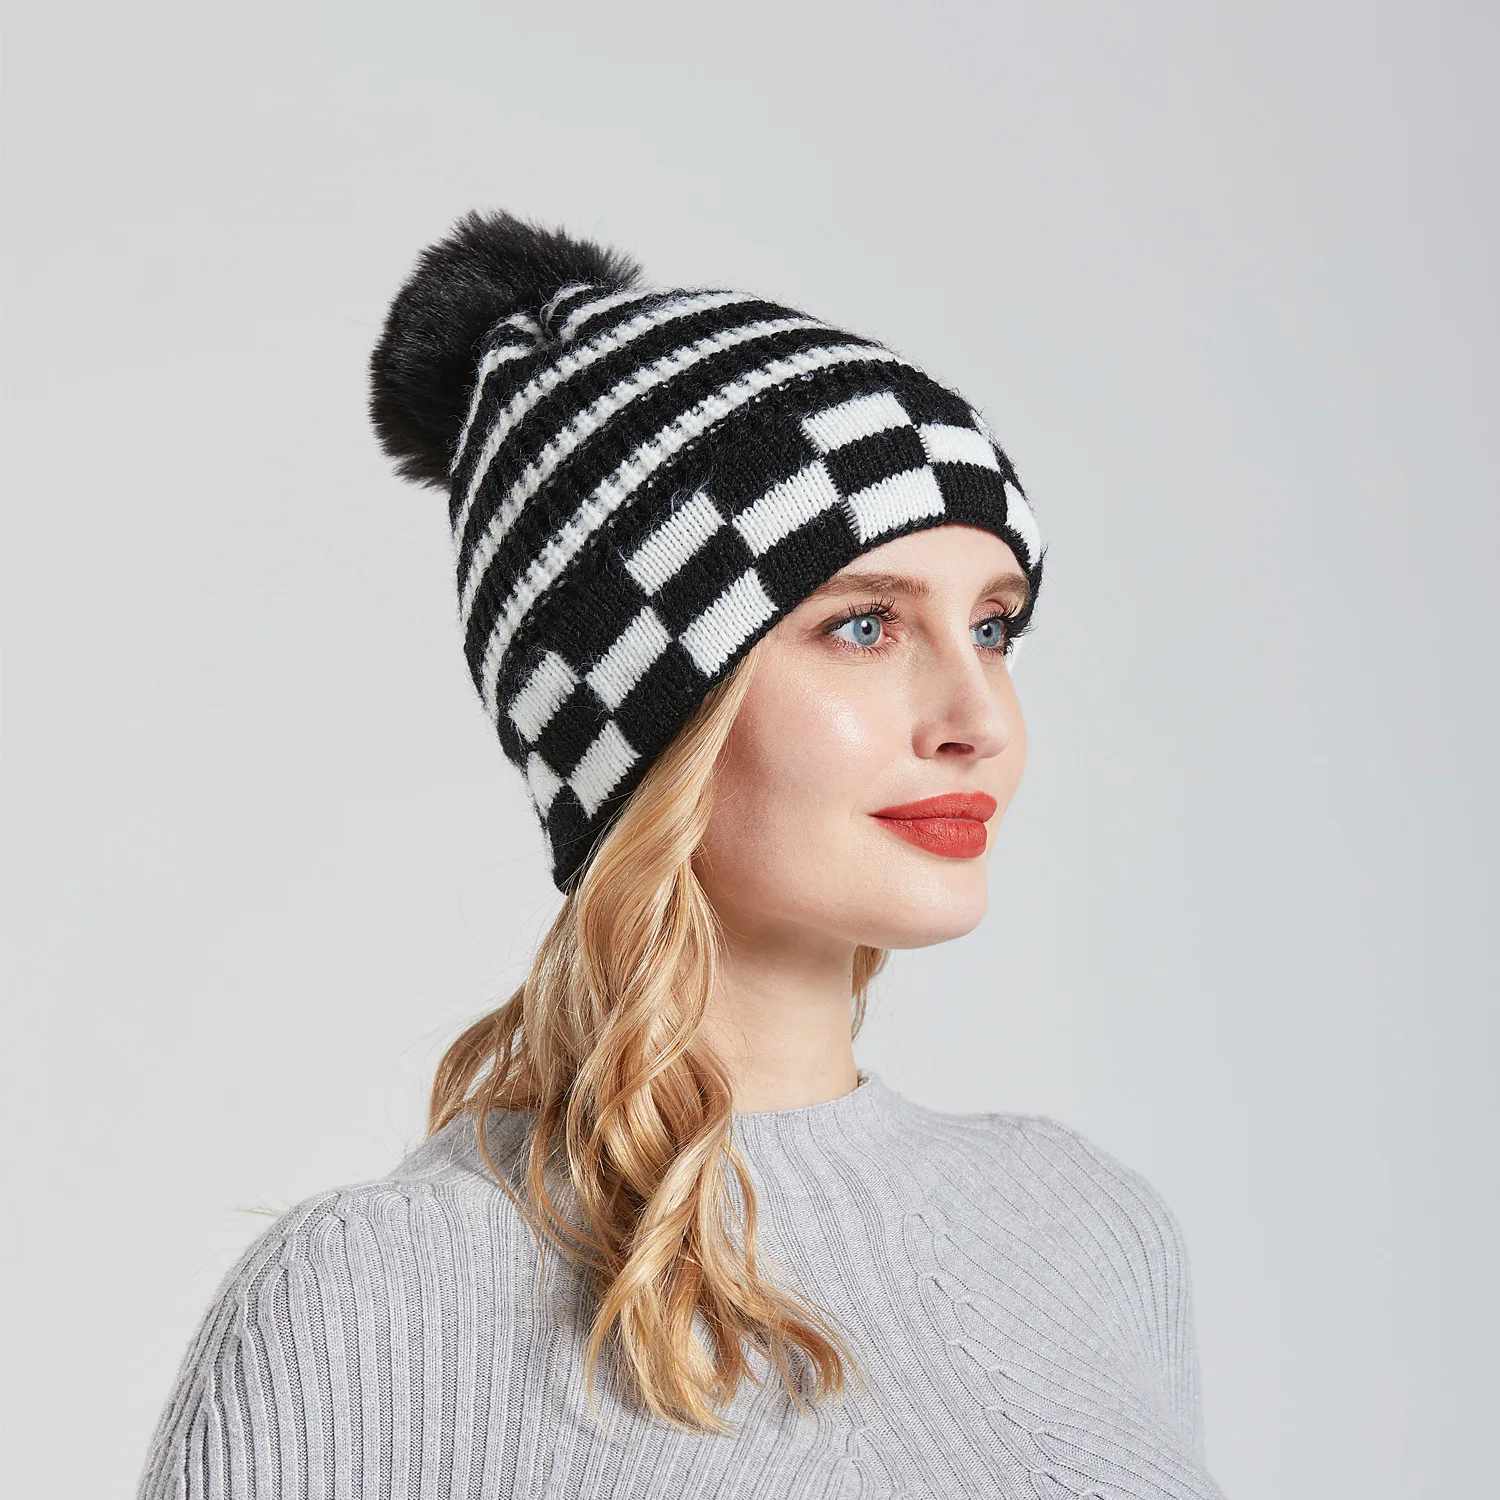 

Winter Warm Hats For Women Men New Fashion Black White Check Beanie Cap Casual Stacking Knitted Bonnet Wool pompom Beanies Mujer